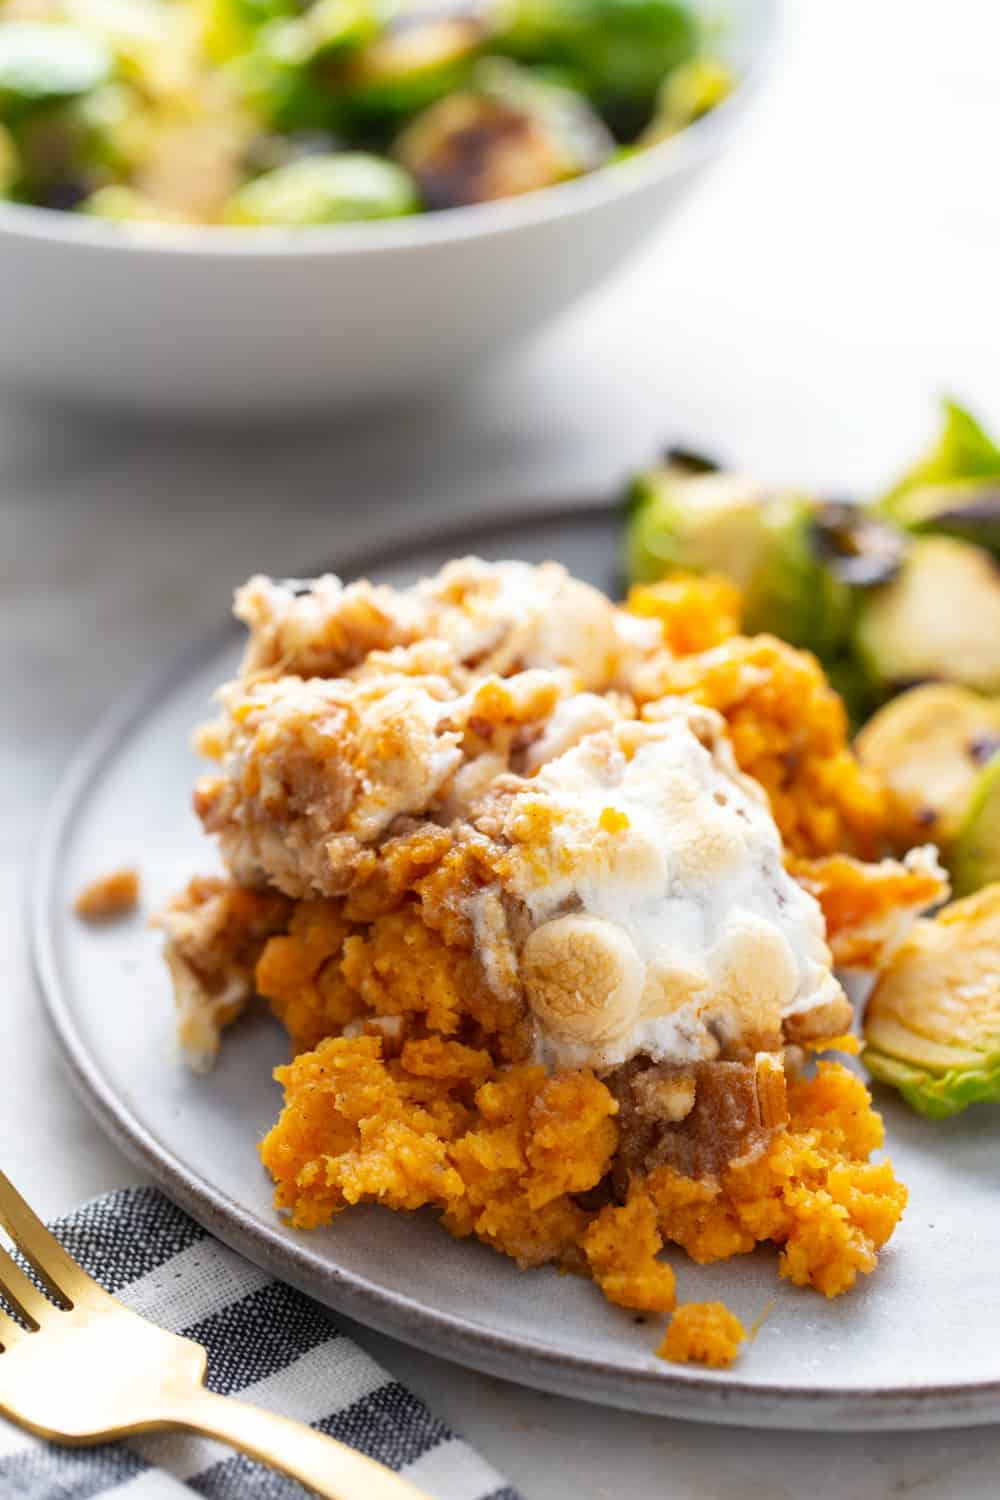 Serving of sweet potato casserole with streusel and marshmallow toppings on a plate